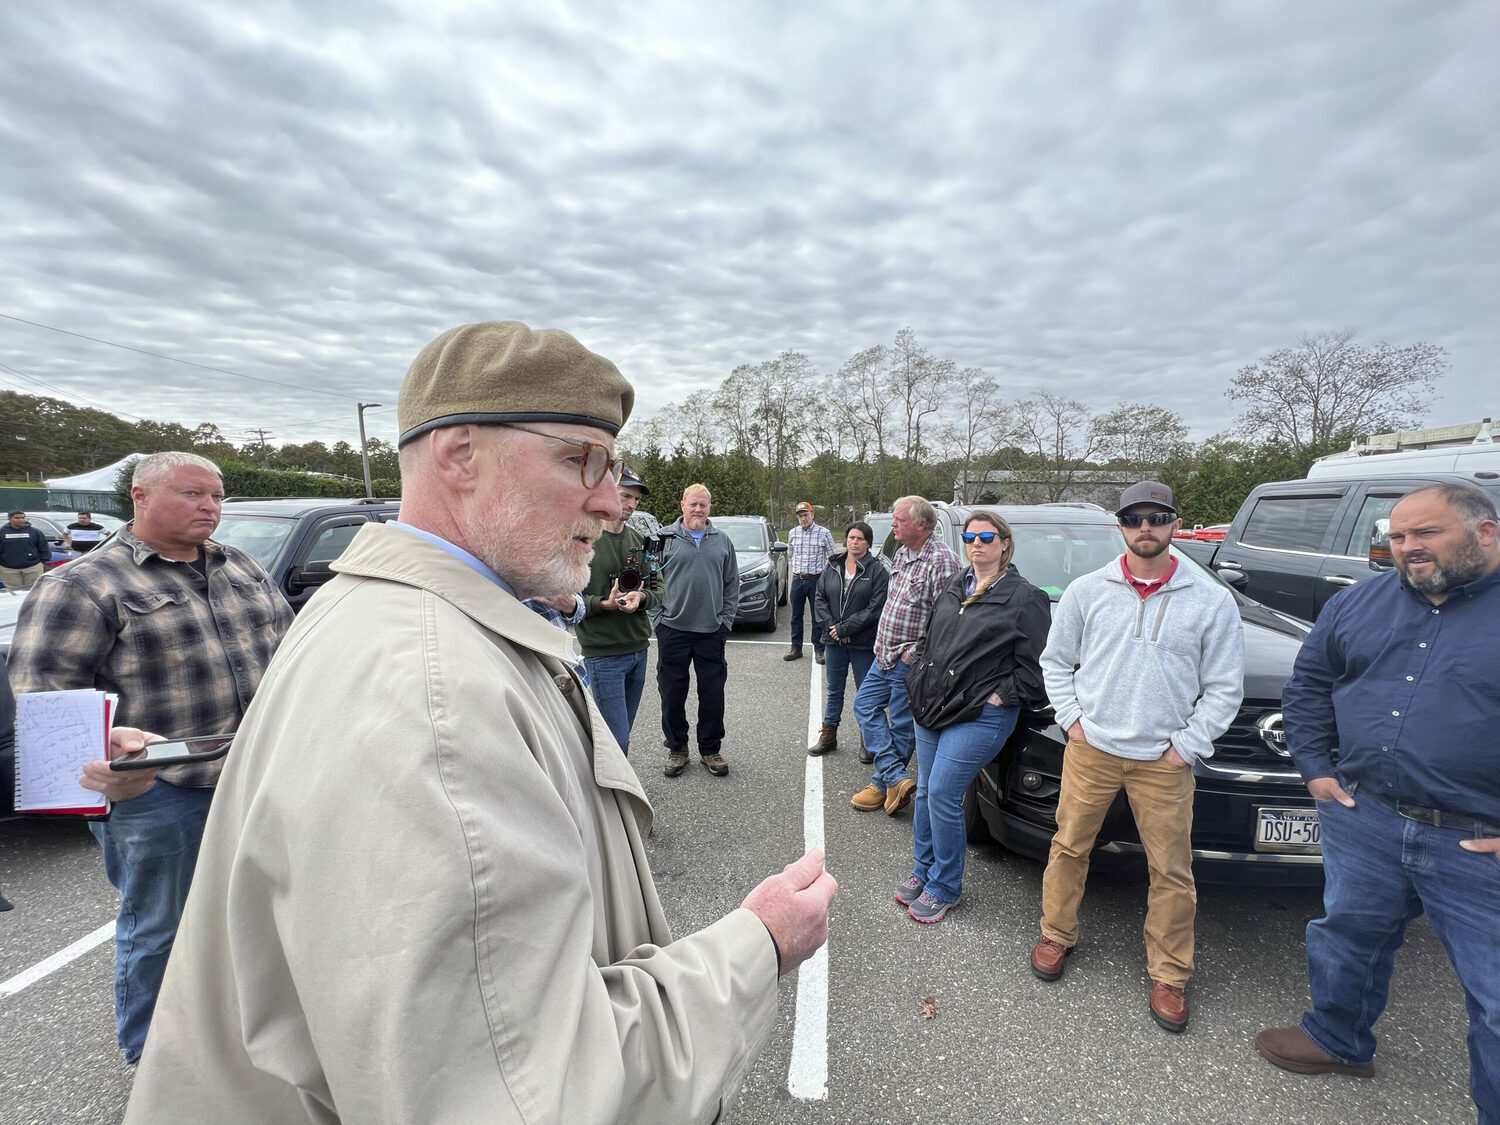 Dan Rodgers, speaking to the defendants in the Truck Beach trespassing case where his incendiary statements led to a censure recommendation from the judge in the case, Suffolk County Supreme Court Justice Paul Baisley.  Rodgers is now suing Baisley, who retired shortly afterward, for defamation. 
DANA SHAW